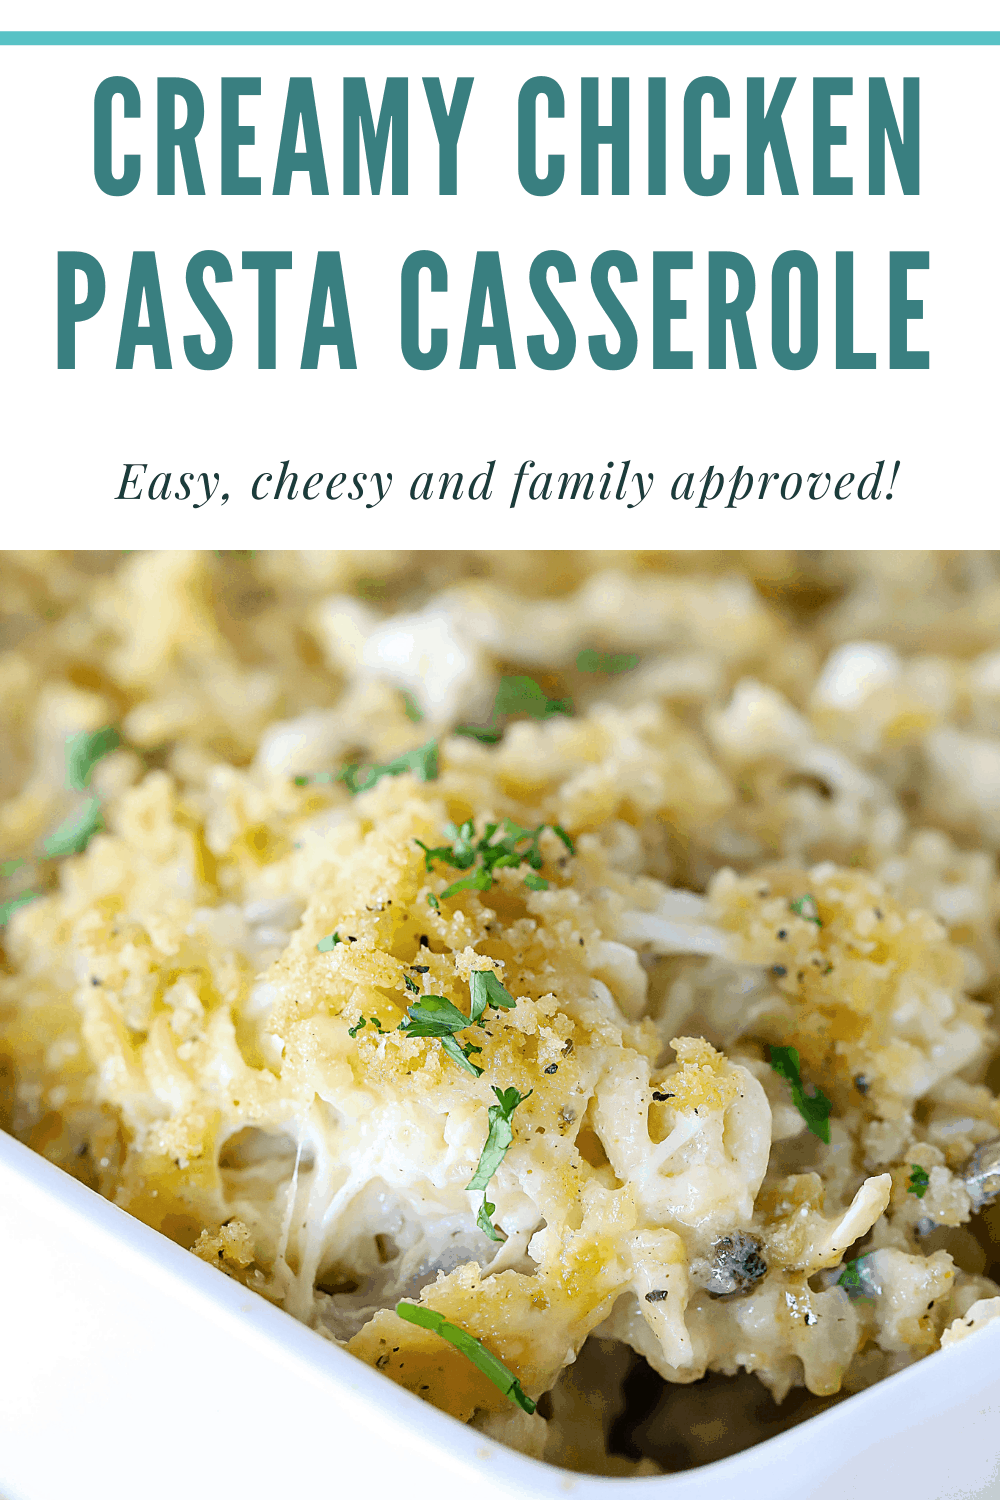 Looking for an easy, cheesy and family approved dinner recipe? You NEED this Creamy Chicken Pasta Casserole in your life! It's always a hit and makes great leftovers (if there are any!) #chicken #dinner #easy #yummy #casserole #pasta #familydinner #yummyhealthyeasy via @jennikolaus